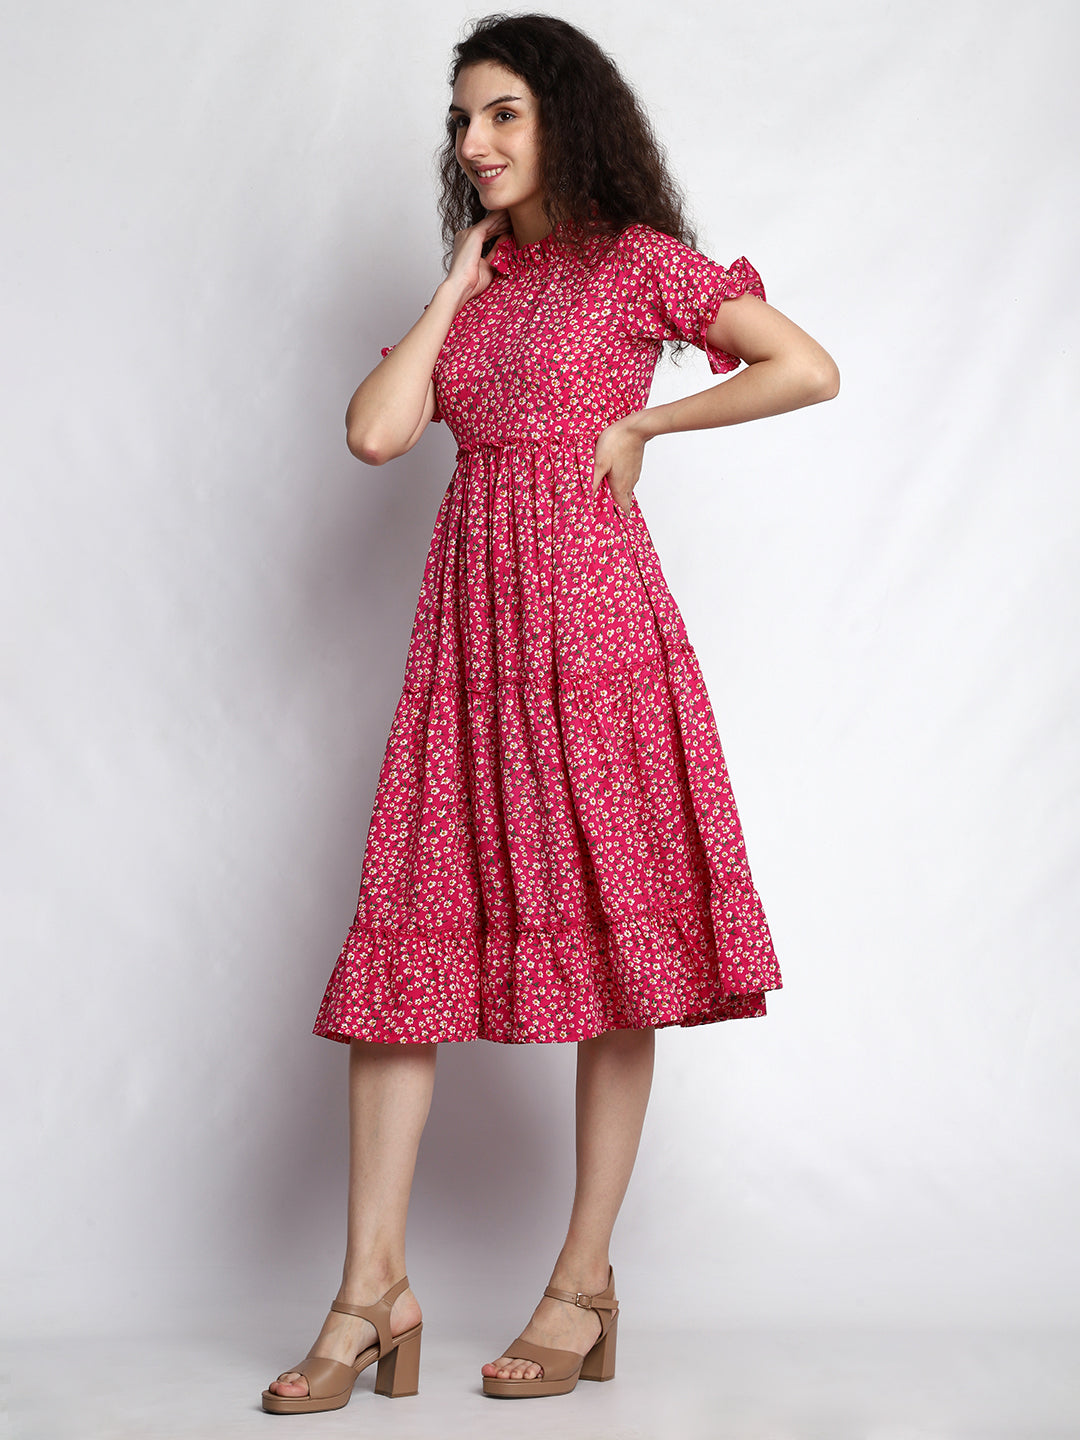 Charming Pink Floral Print Fit and Flare Dress